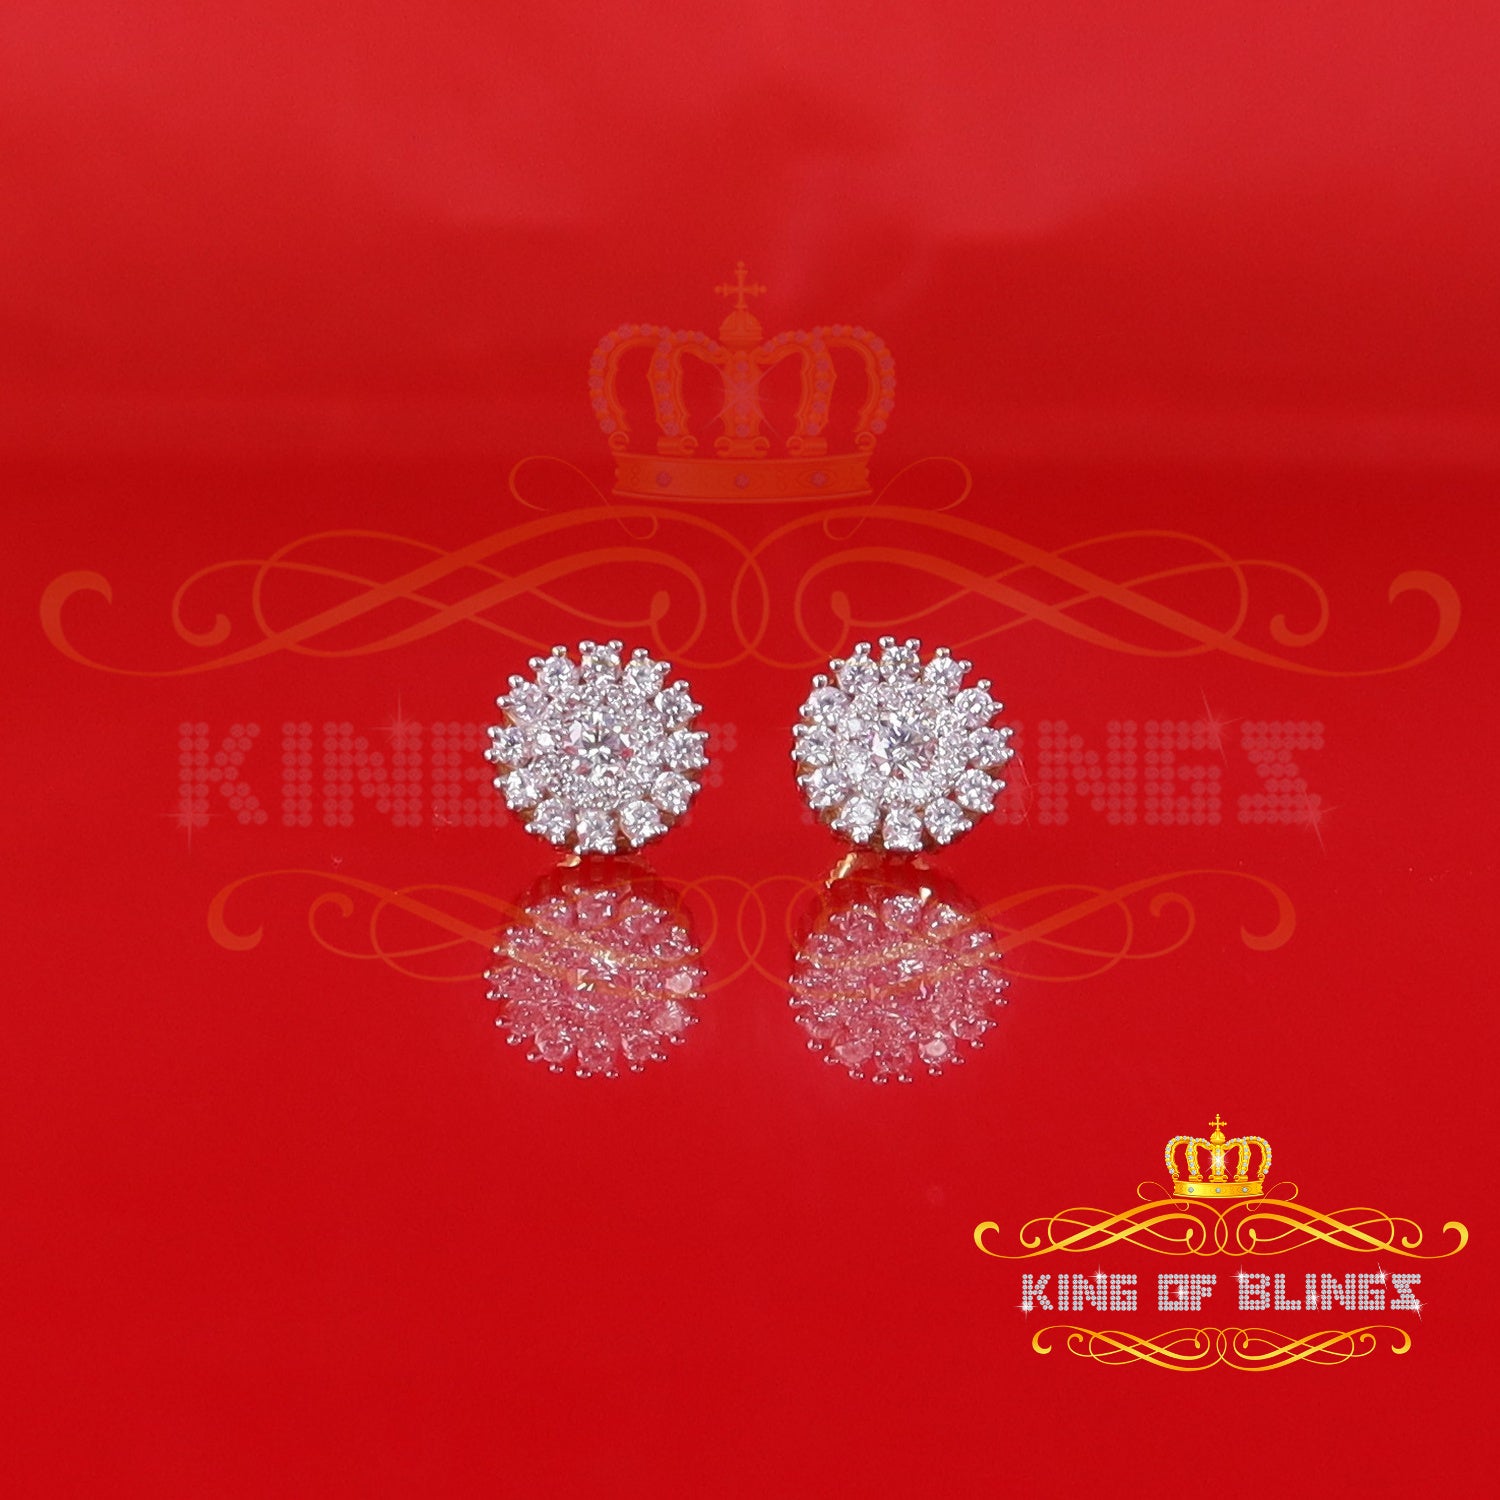 King of Bling's 1.28ct Cubic Zirconia Yellow 925 Sterling Silver For Men's/Womens Round Earrings KING OF BLINGS